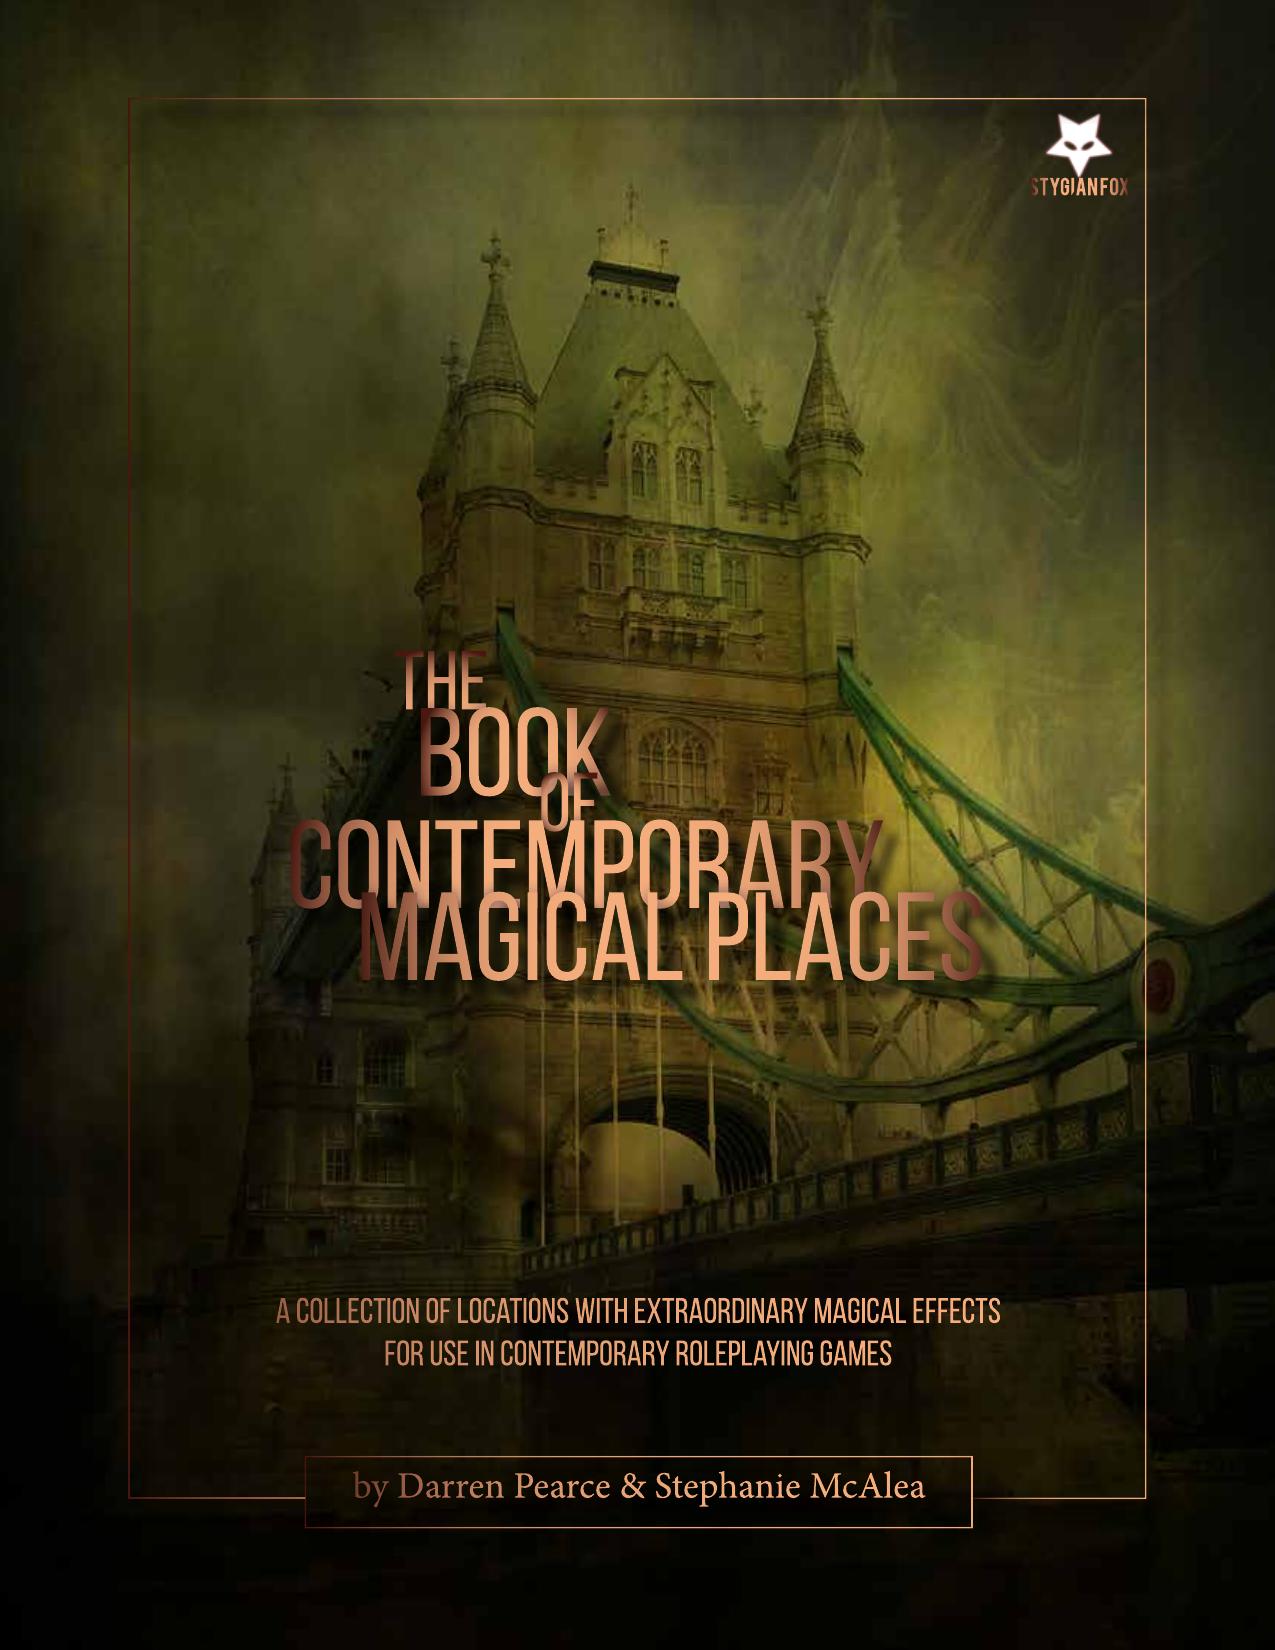 CoC - The Book of Contemporary Magical Places [Stygian Fox